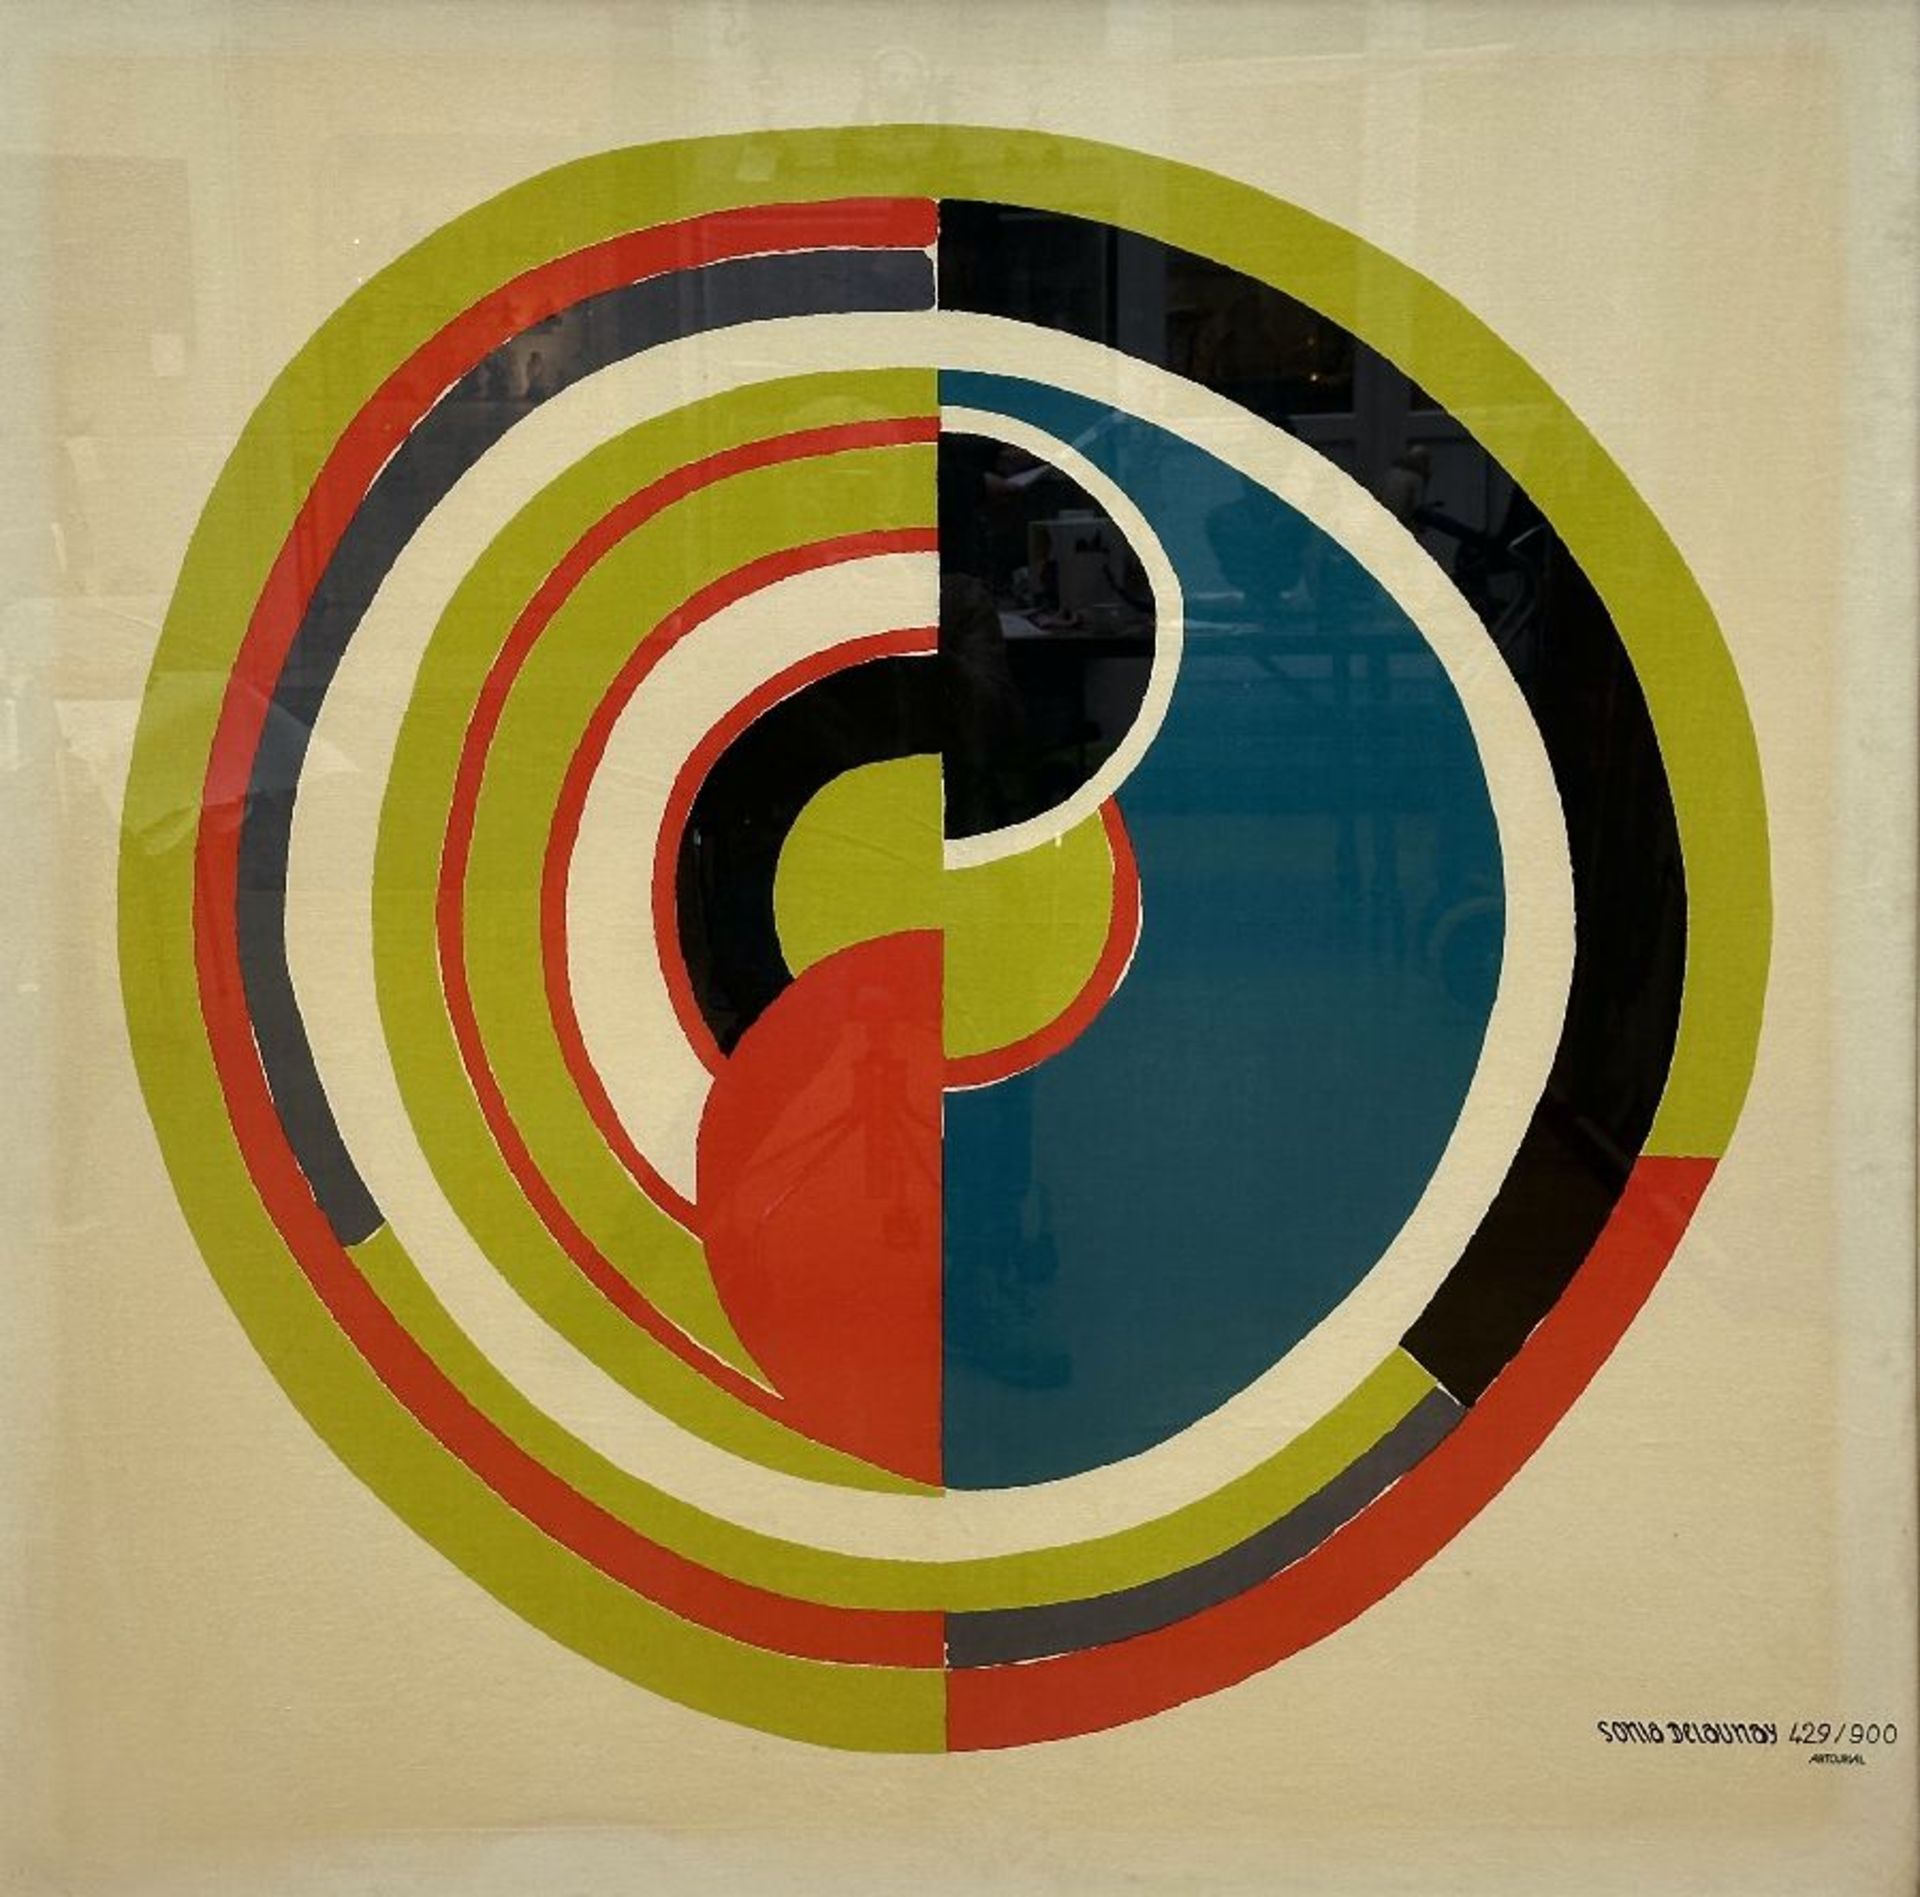 Sonia Delaunay (after): print on textile 'signal' (Artcurial edition 429/900)